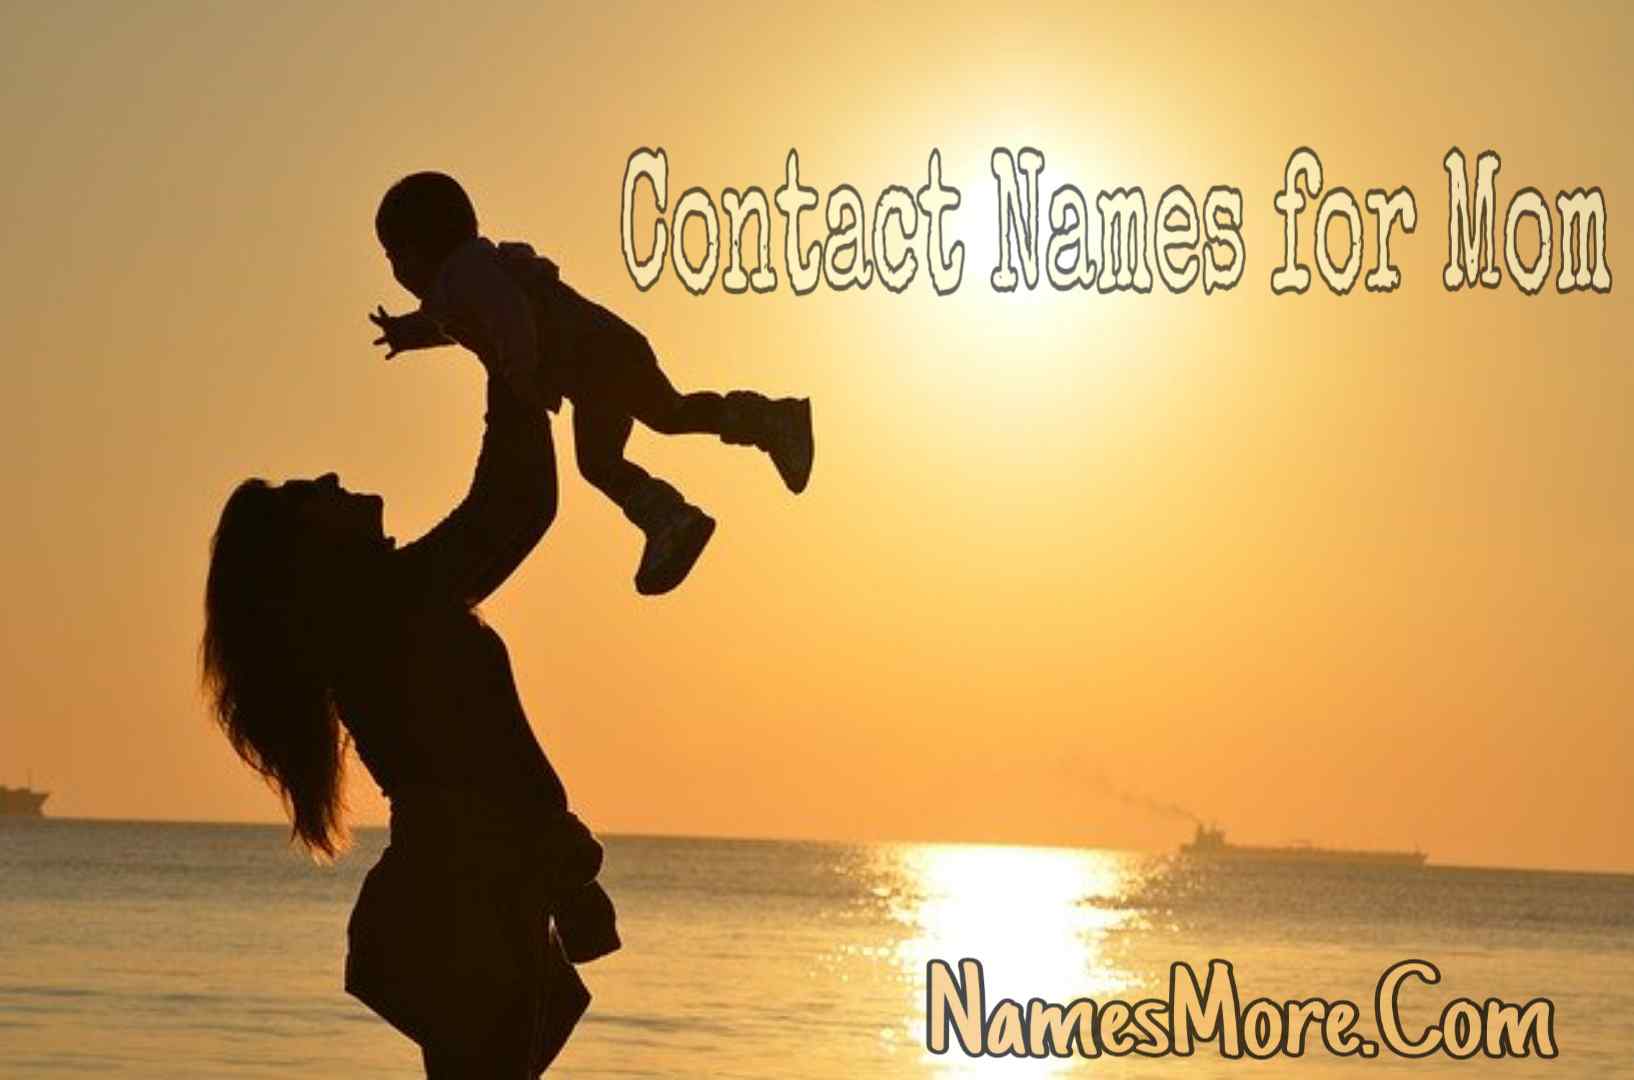 Featured Image for Contact Names For Mom [600+ Cute Nicknames For Mom]